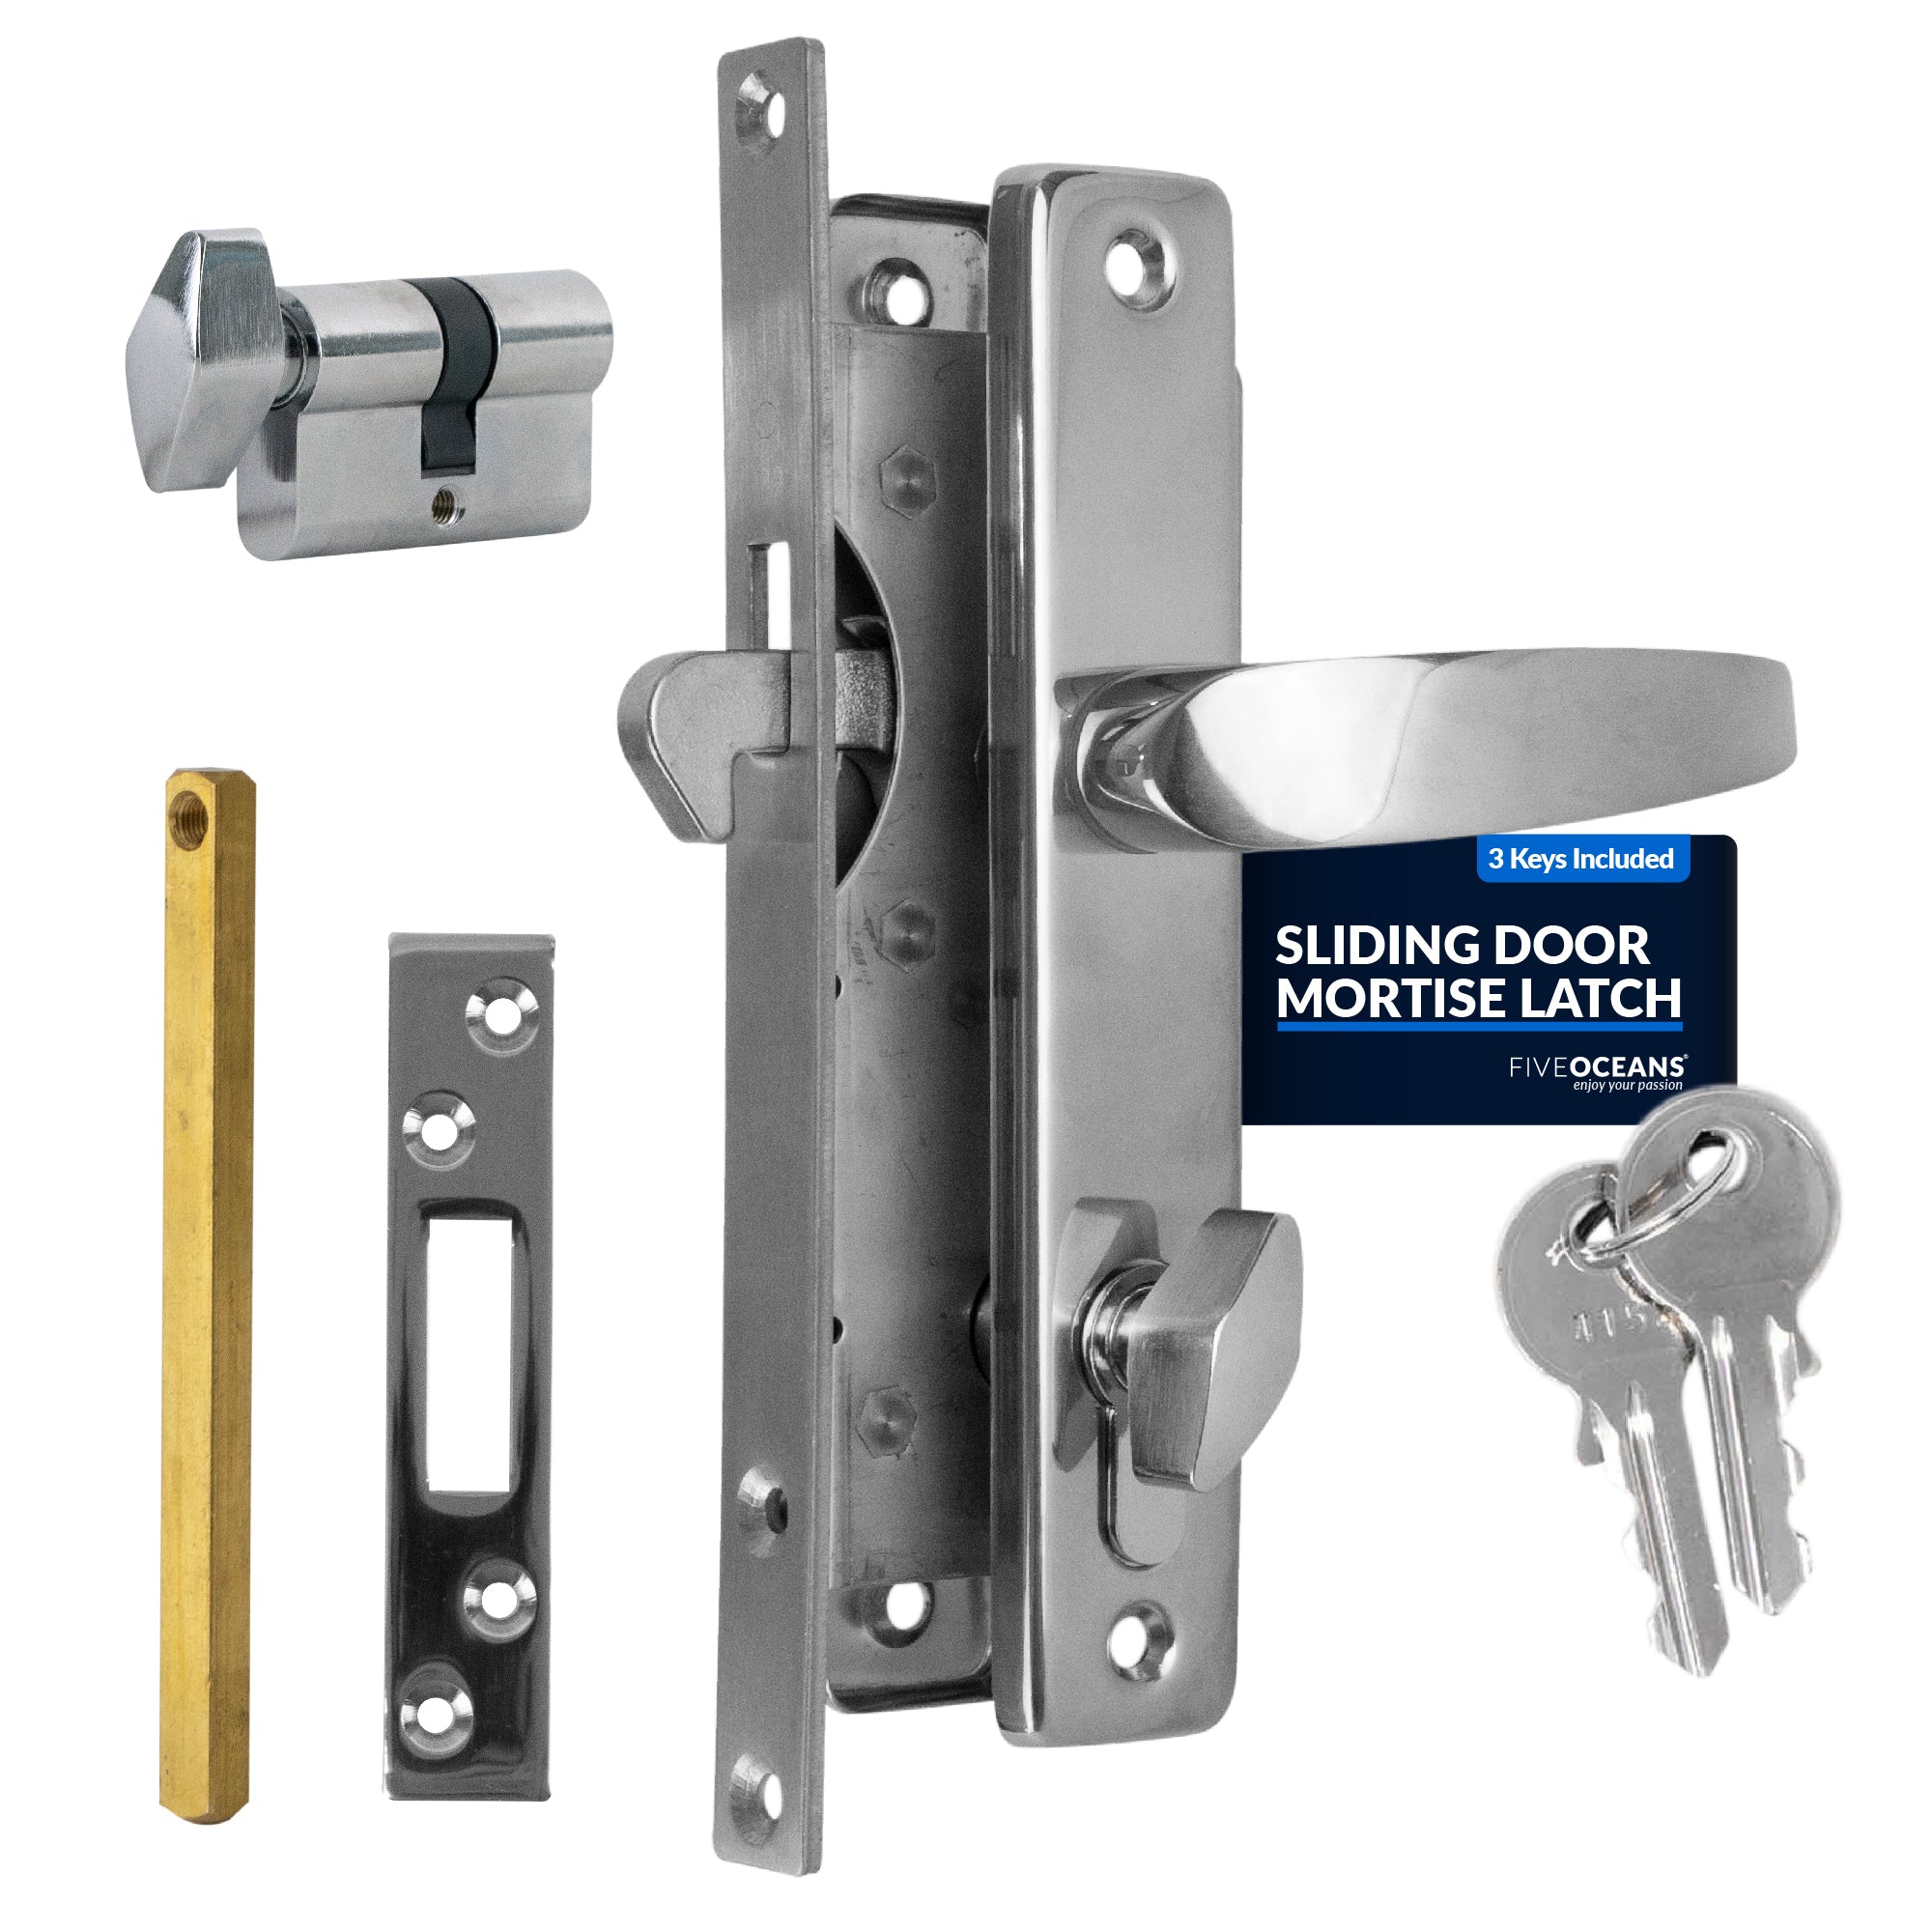 Sliding Door Mortise Latch with 3 Keys, Stainless Steel - FO2240